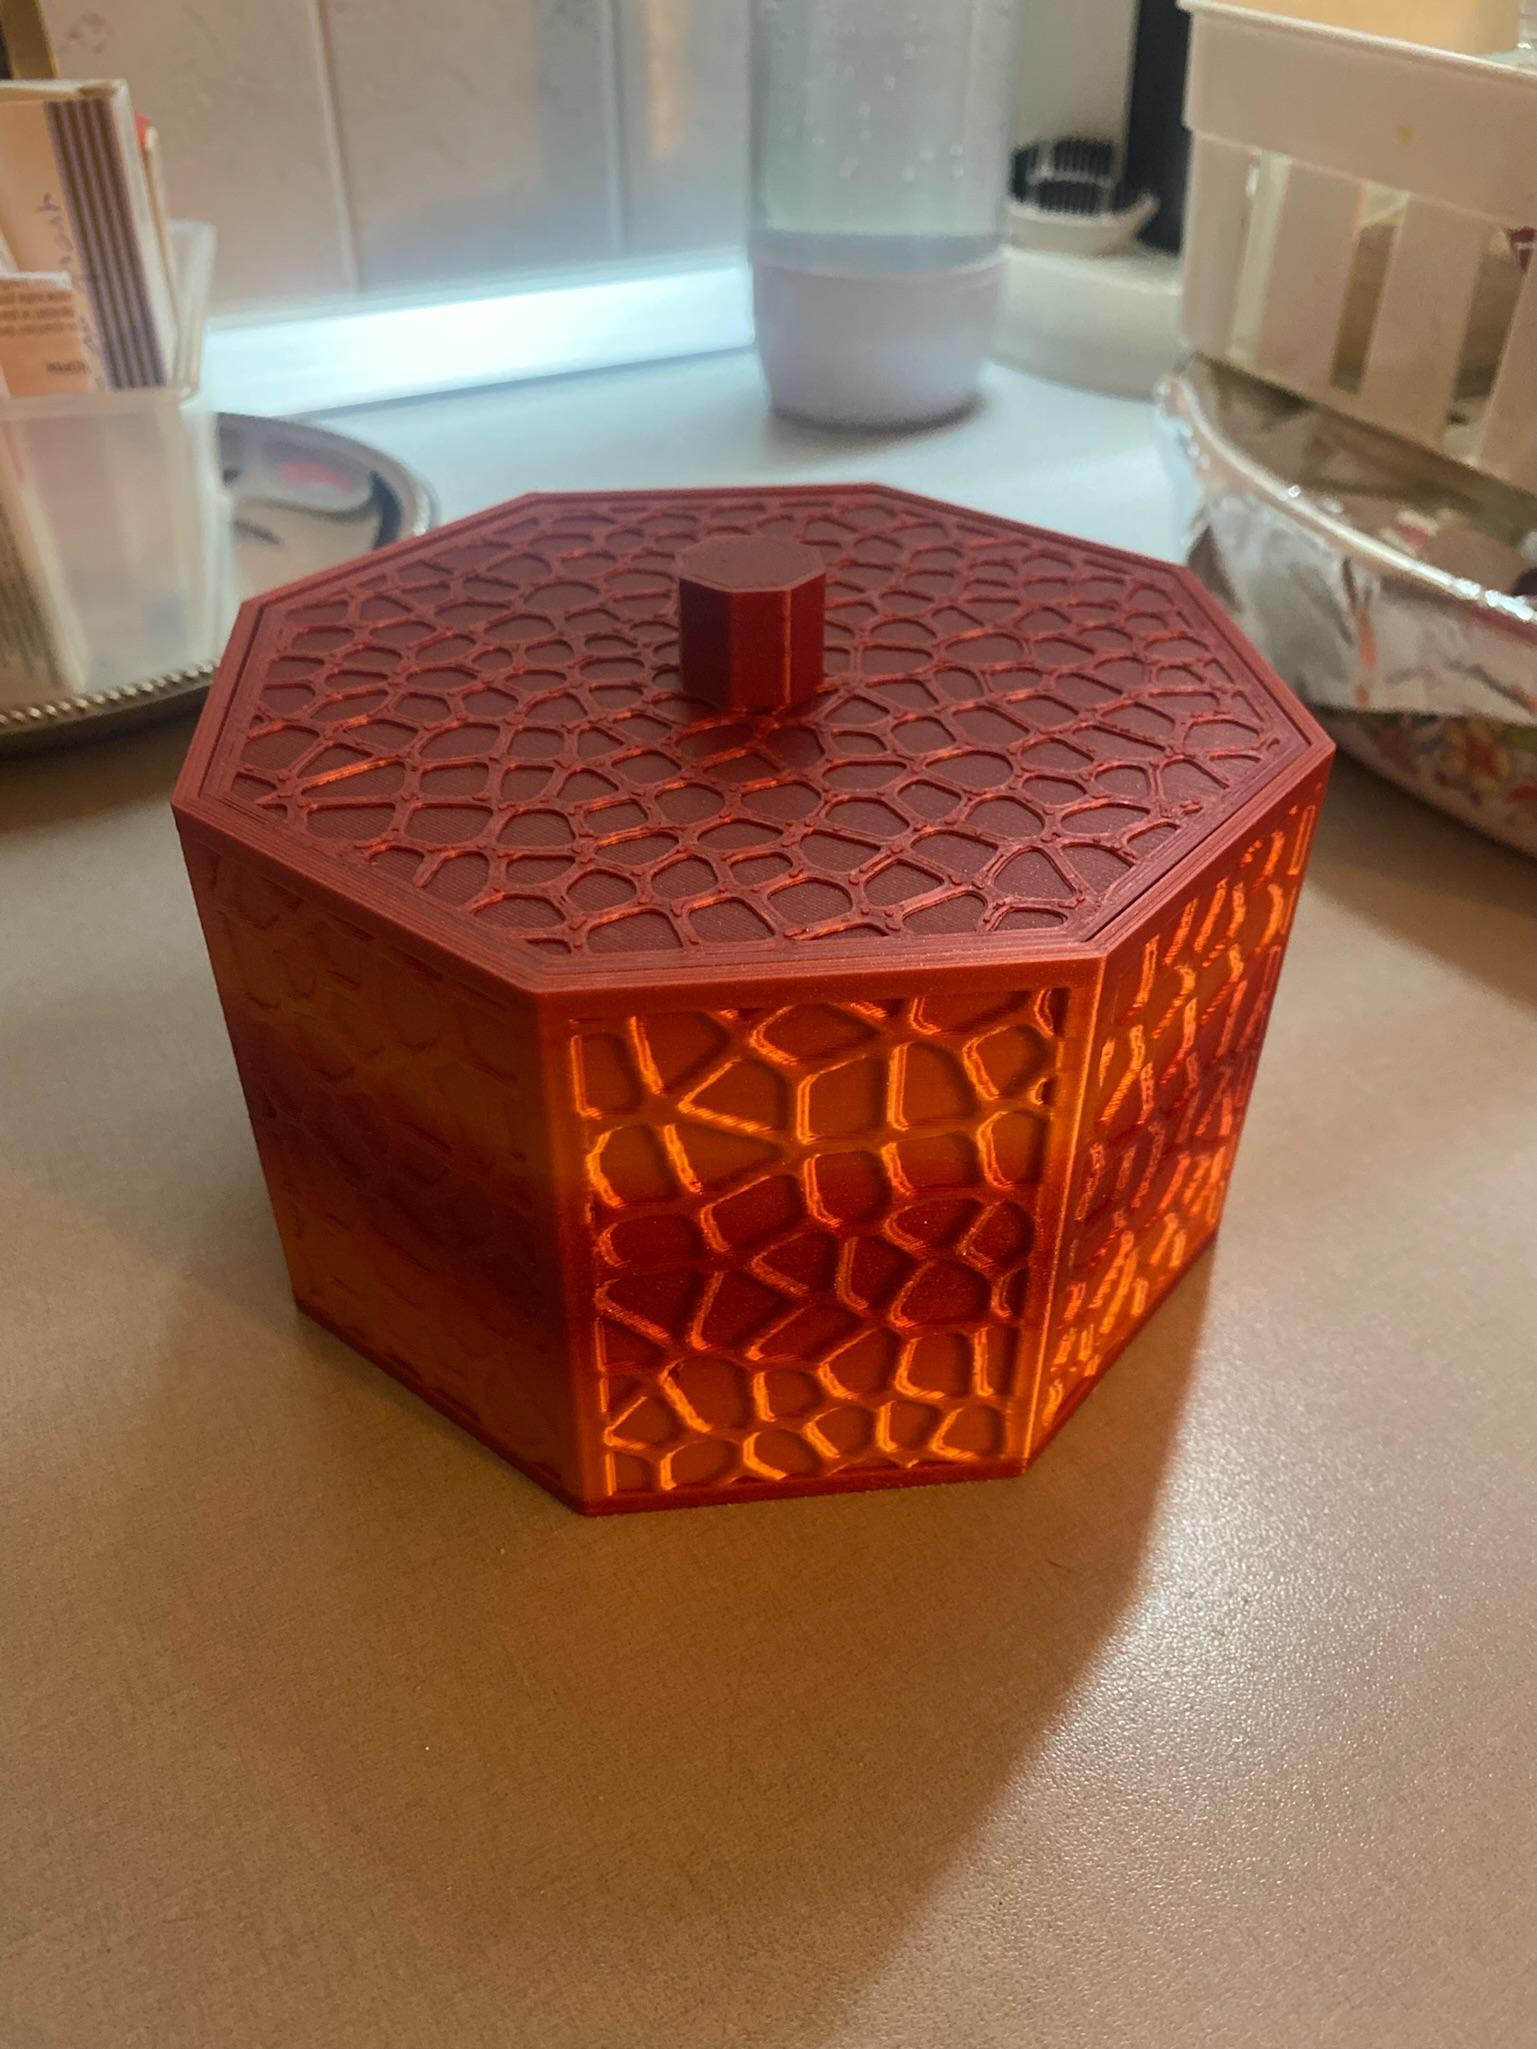 Voronoi Octobox with lid - Resized to 180%
Amolen Silk & Shiny red and gold PLA - 3d model